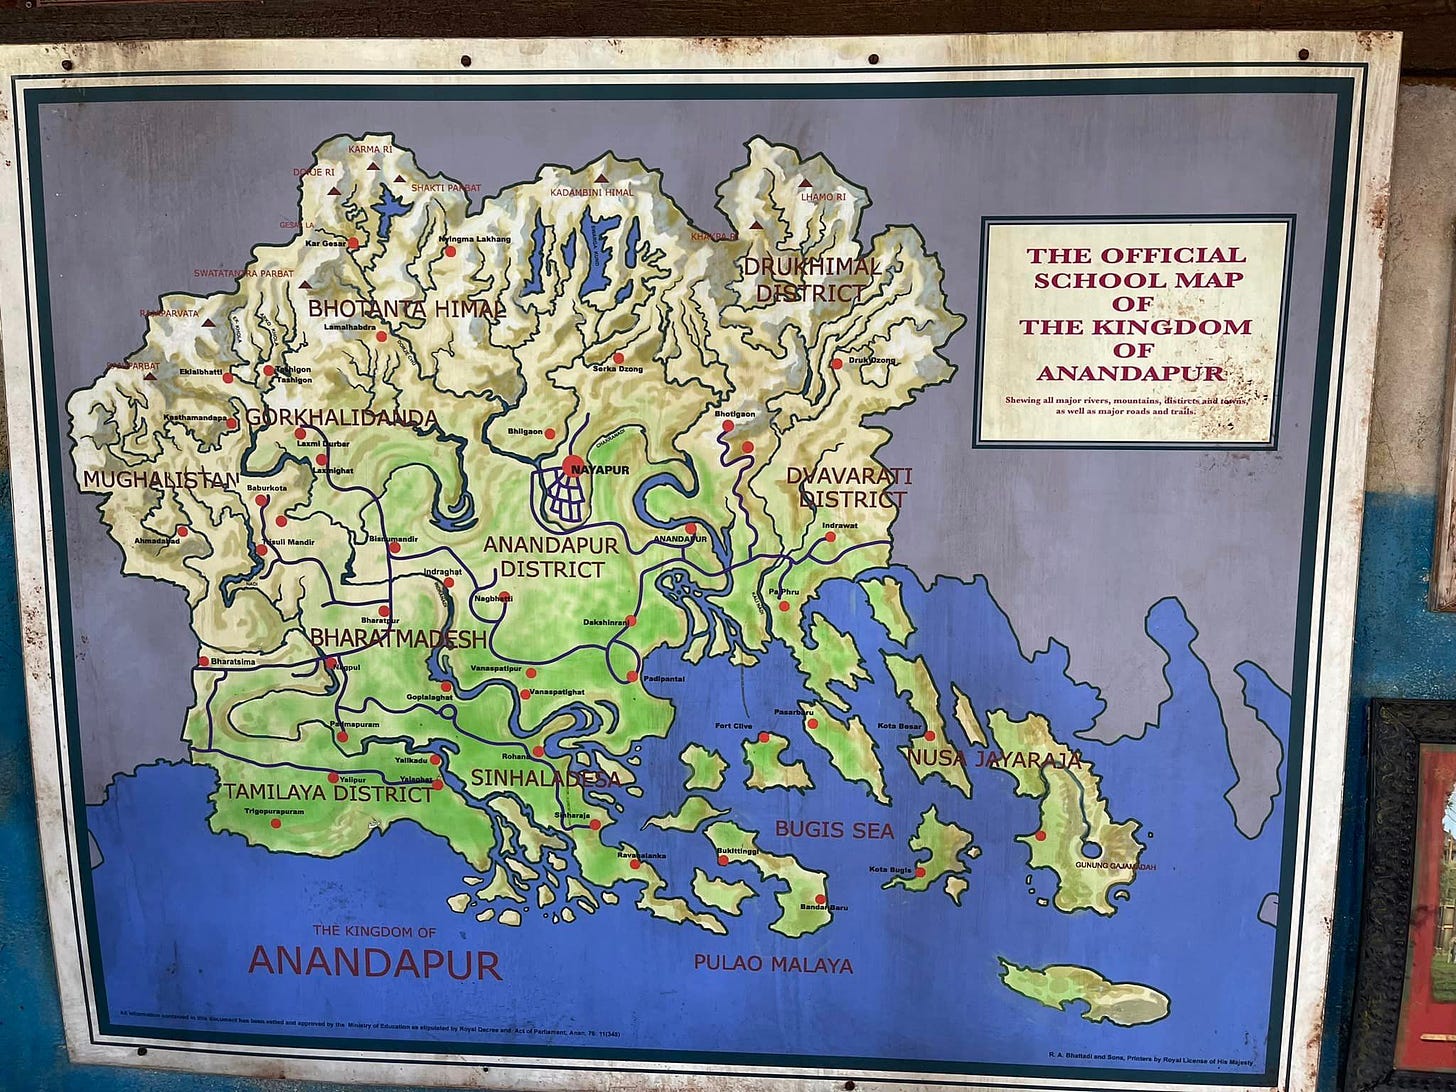 May be an image of map and text